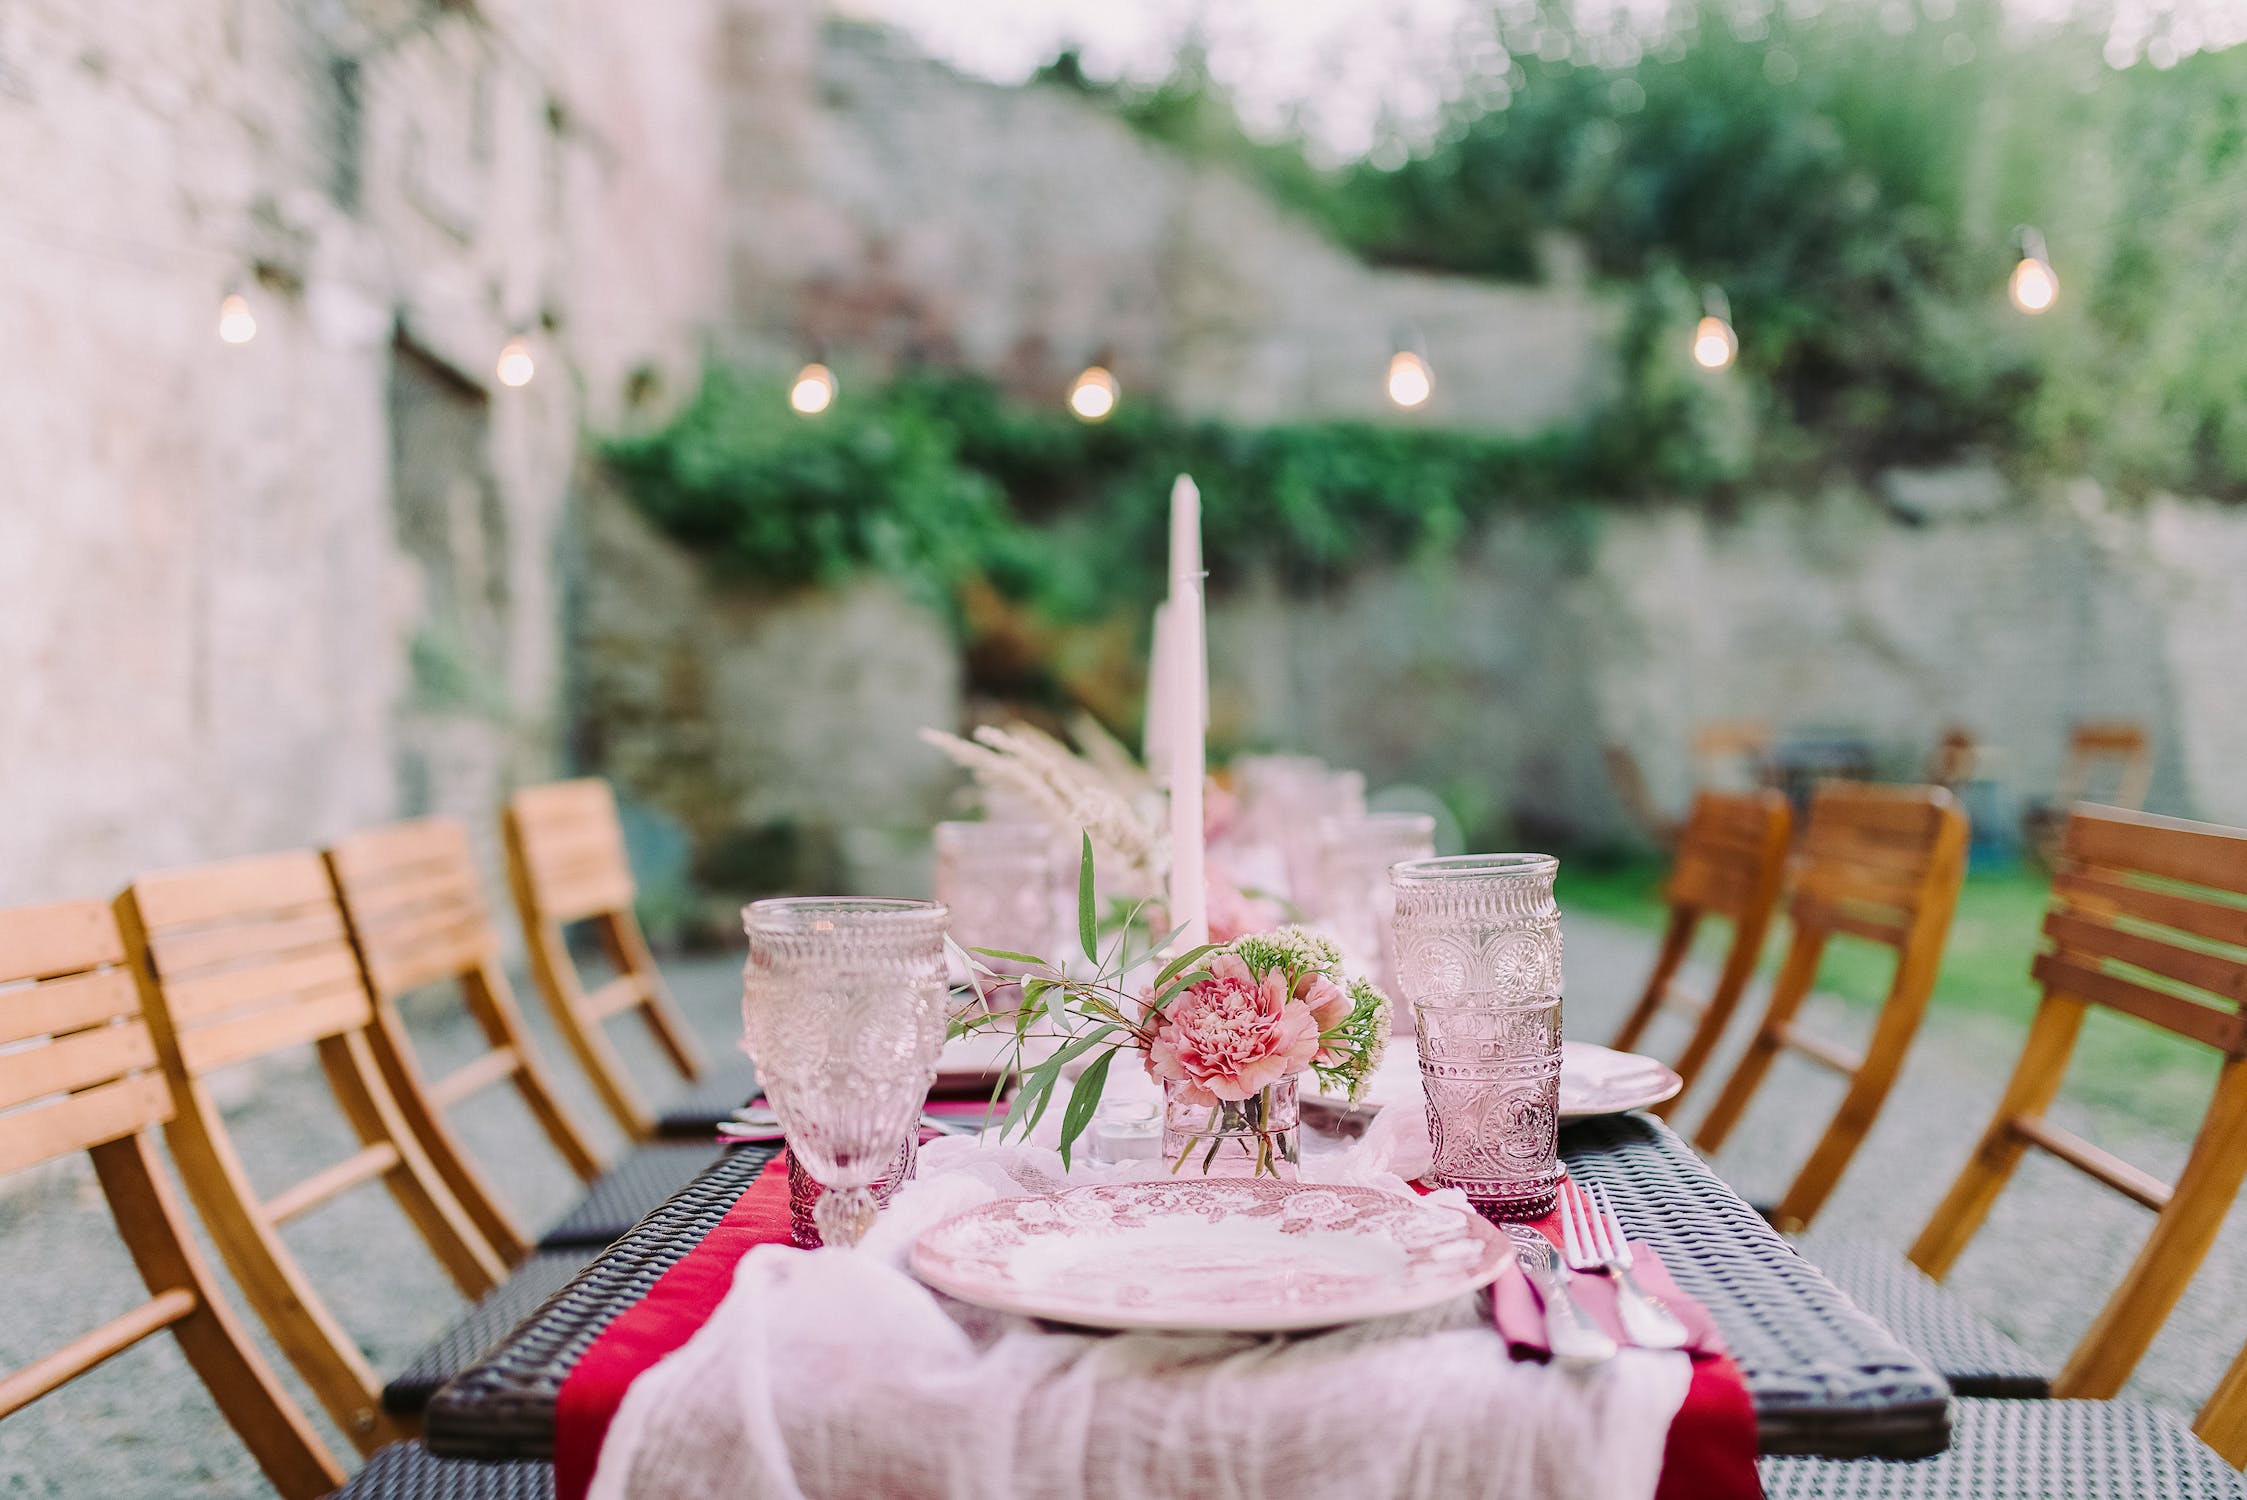 Here’s how to start planning a wedding on the right note